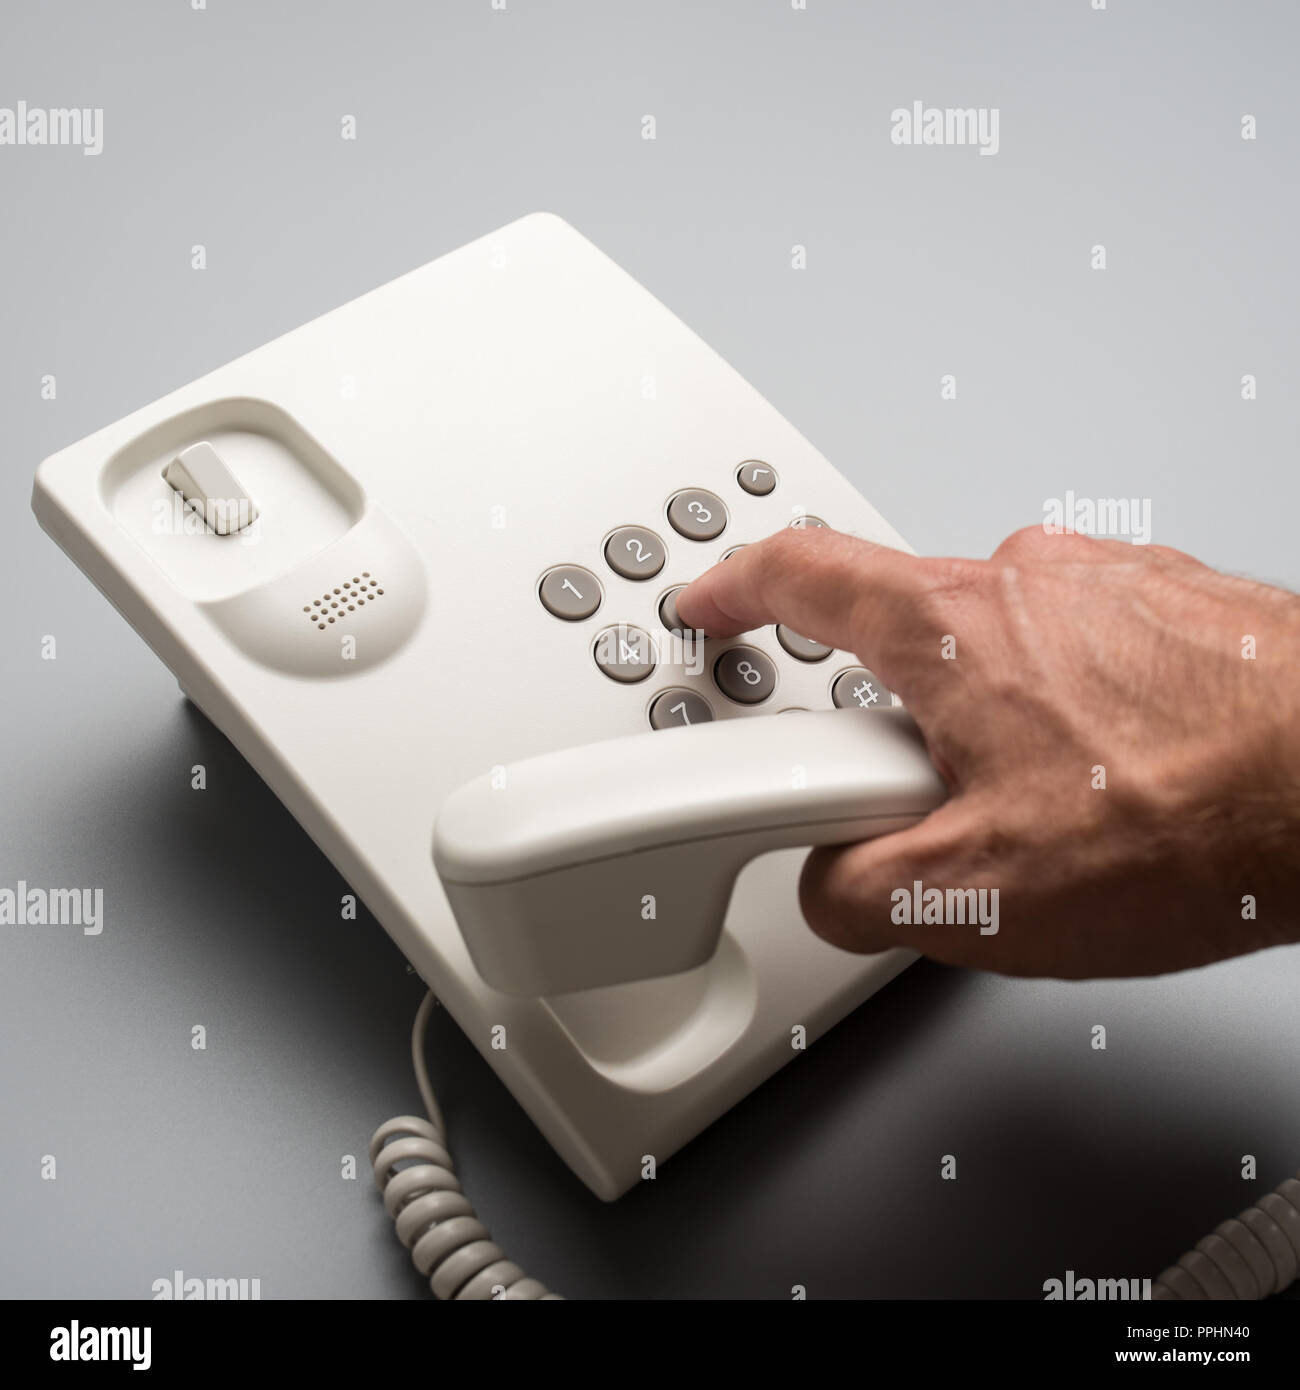 Male hand dialing telephone number using white landline phone, over grey background. Stock Photo